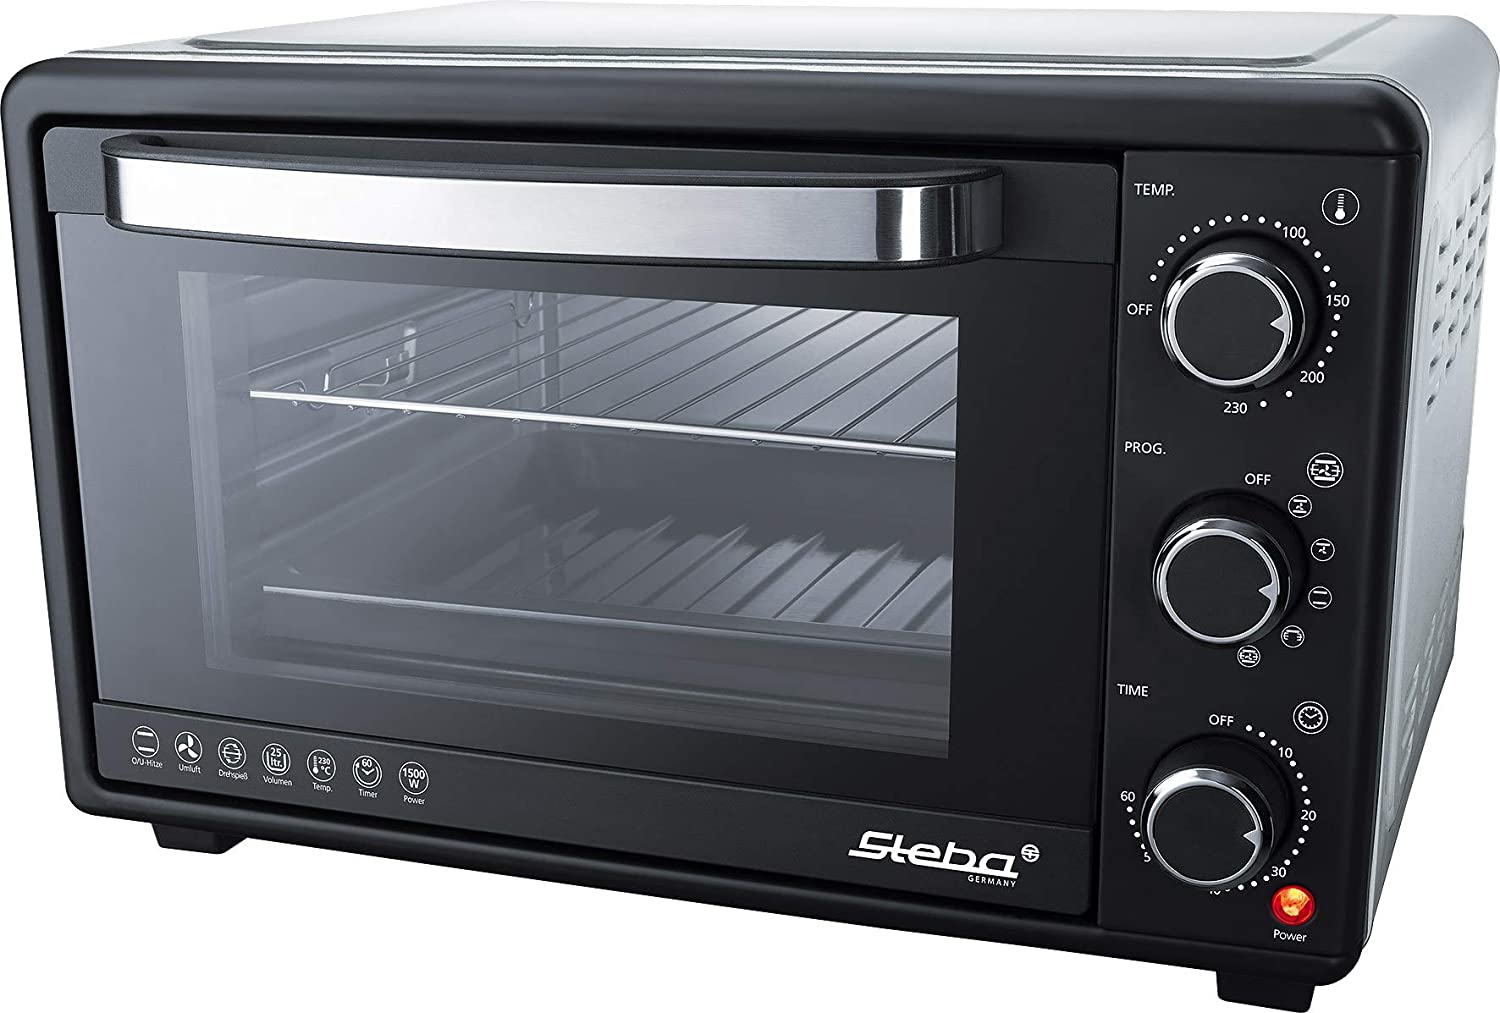 Steba KB A25 Grill Oven Housing Insulation for Reduced Surface Temperature Rotating Spit Can be Circulated Air On Top and Bottom Heat Non-stick Interior 25 Litre Volume